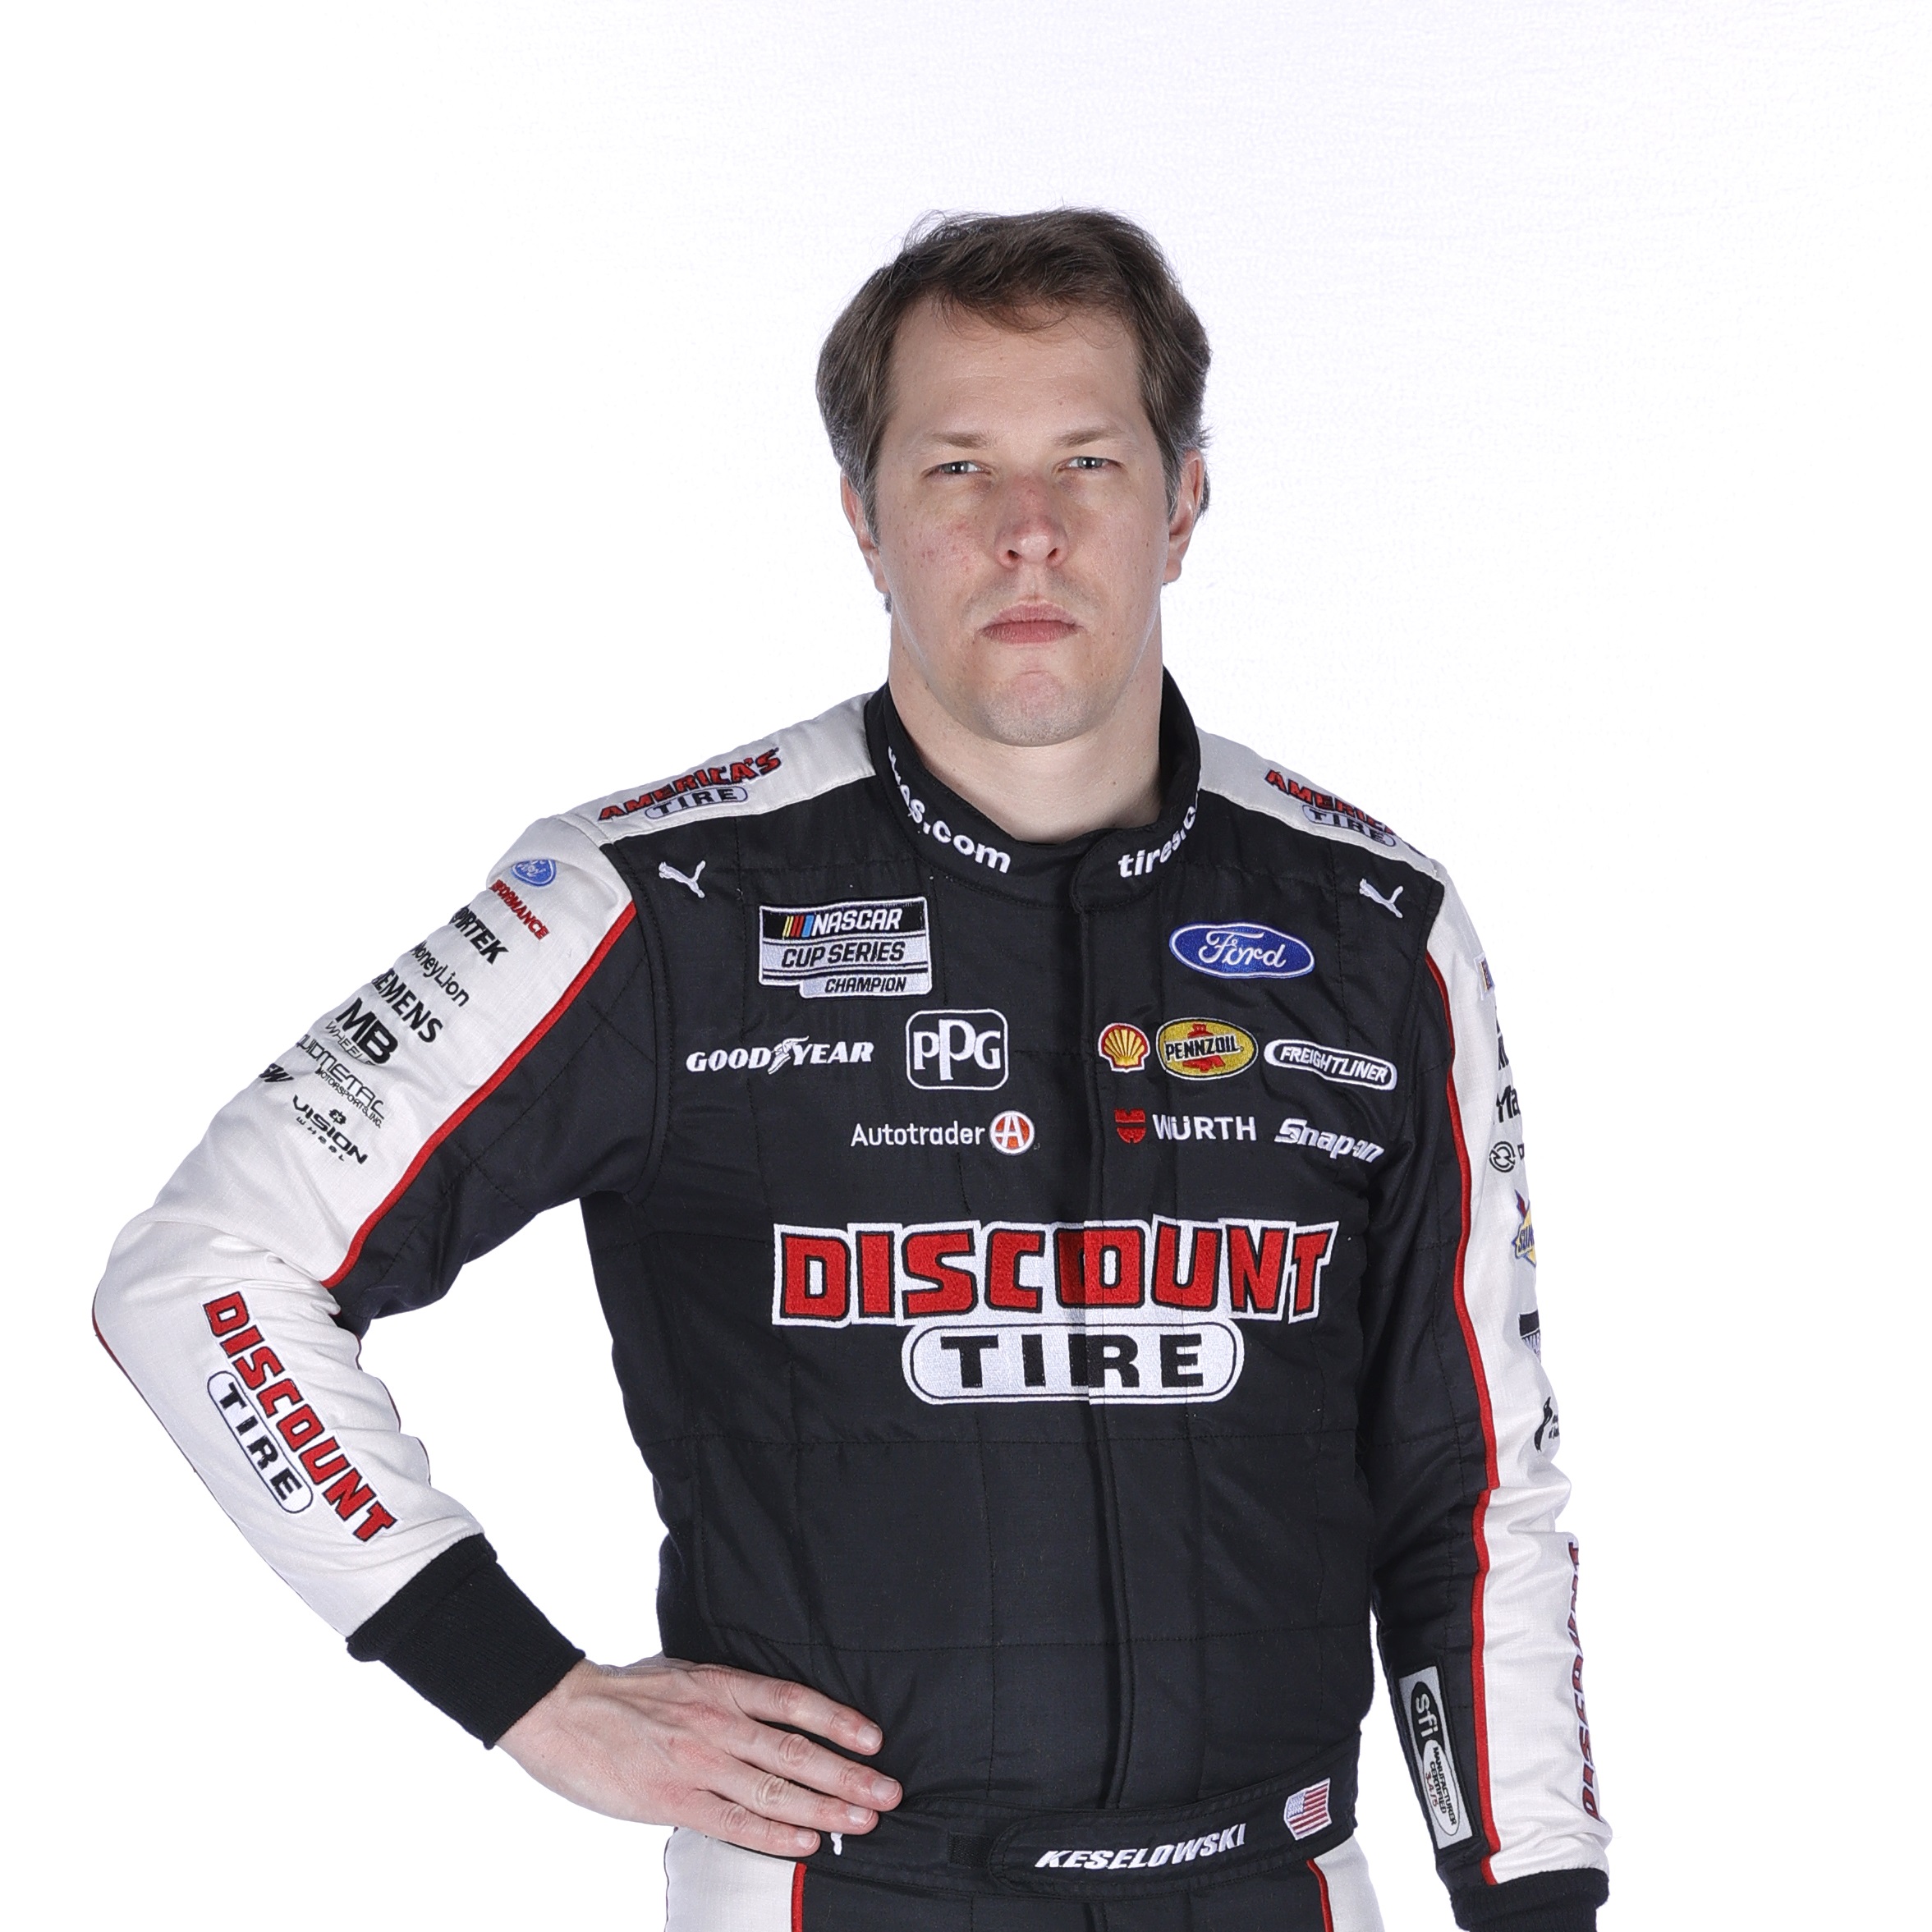 NASCAR Cup Series driver Brad Keselowski poses for a photo during NASCAR production days at Fox Sports on Jan. 19, 2021 in Charlotte, North Carolina. | Chris Graythen/Getty Images